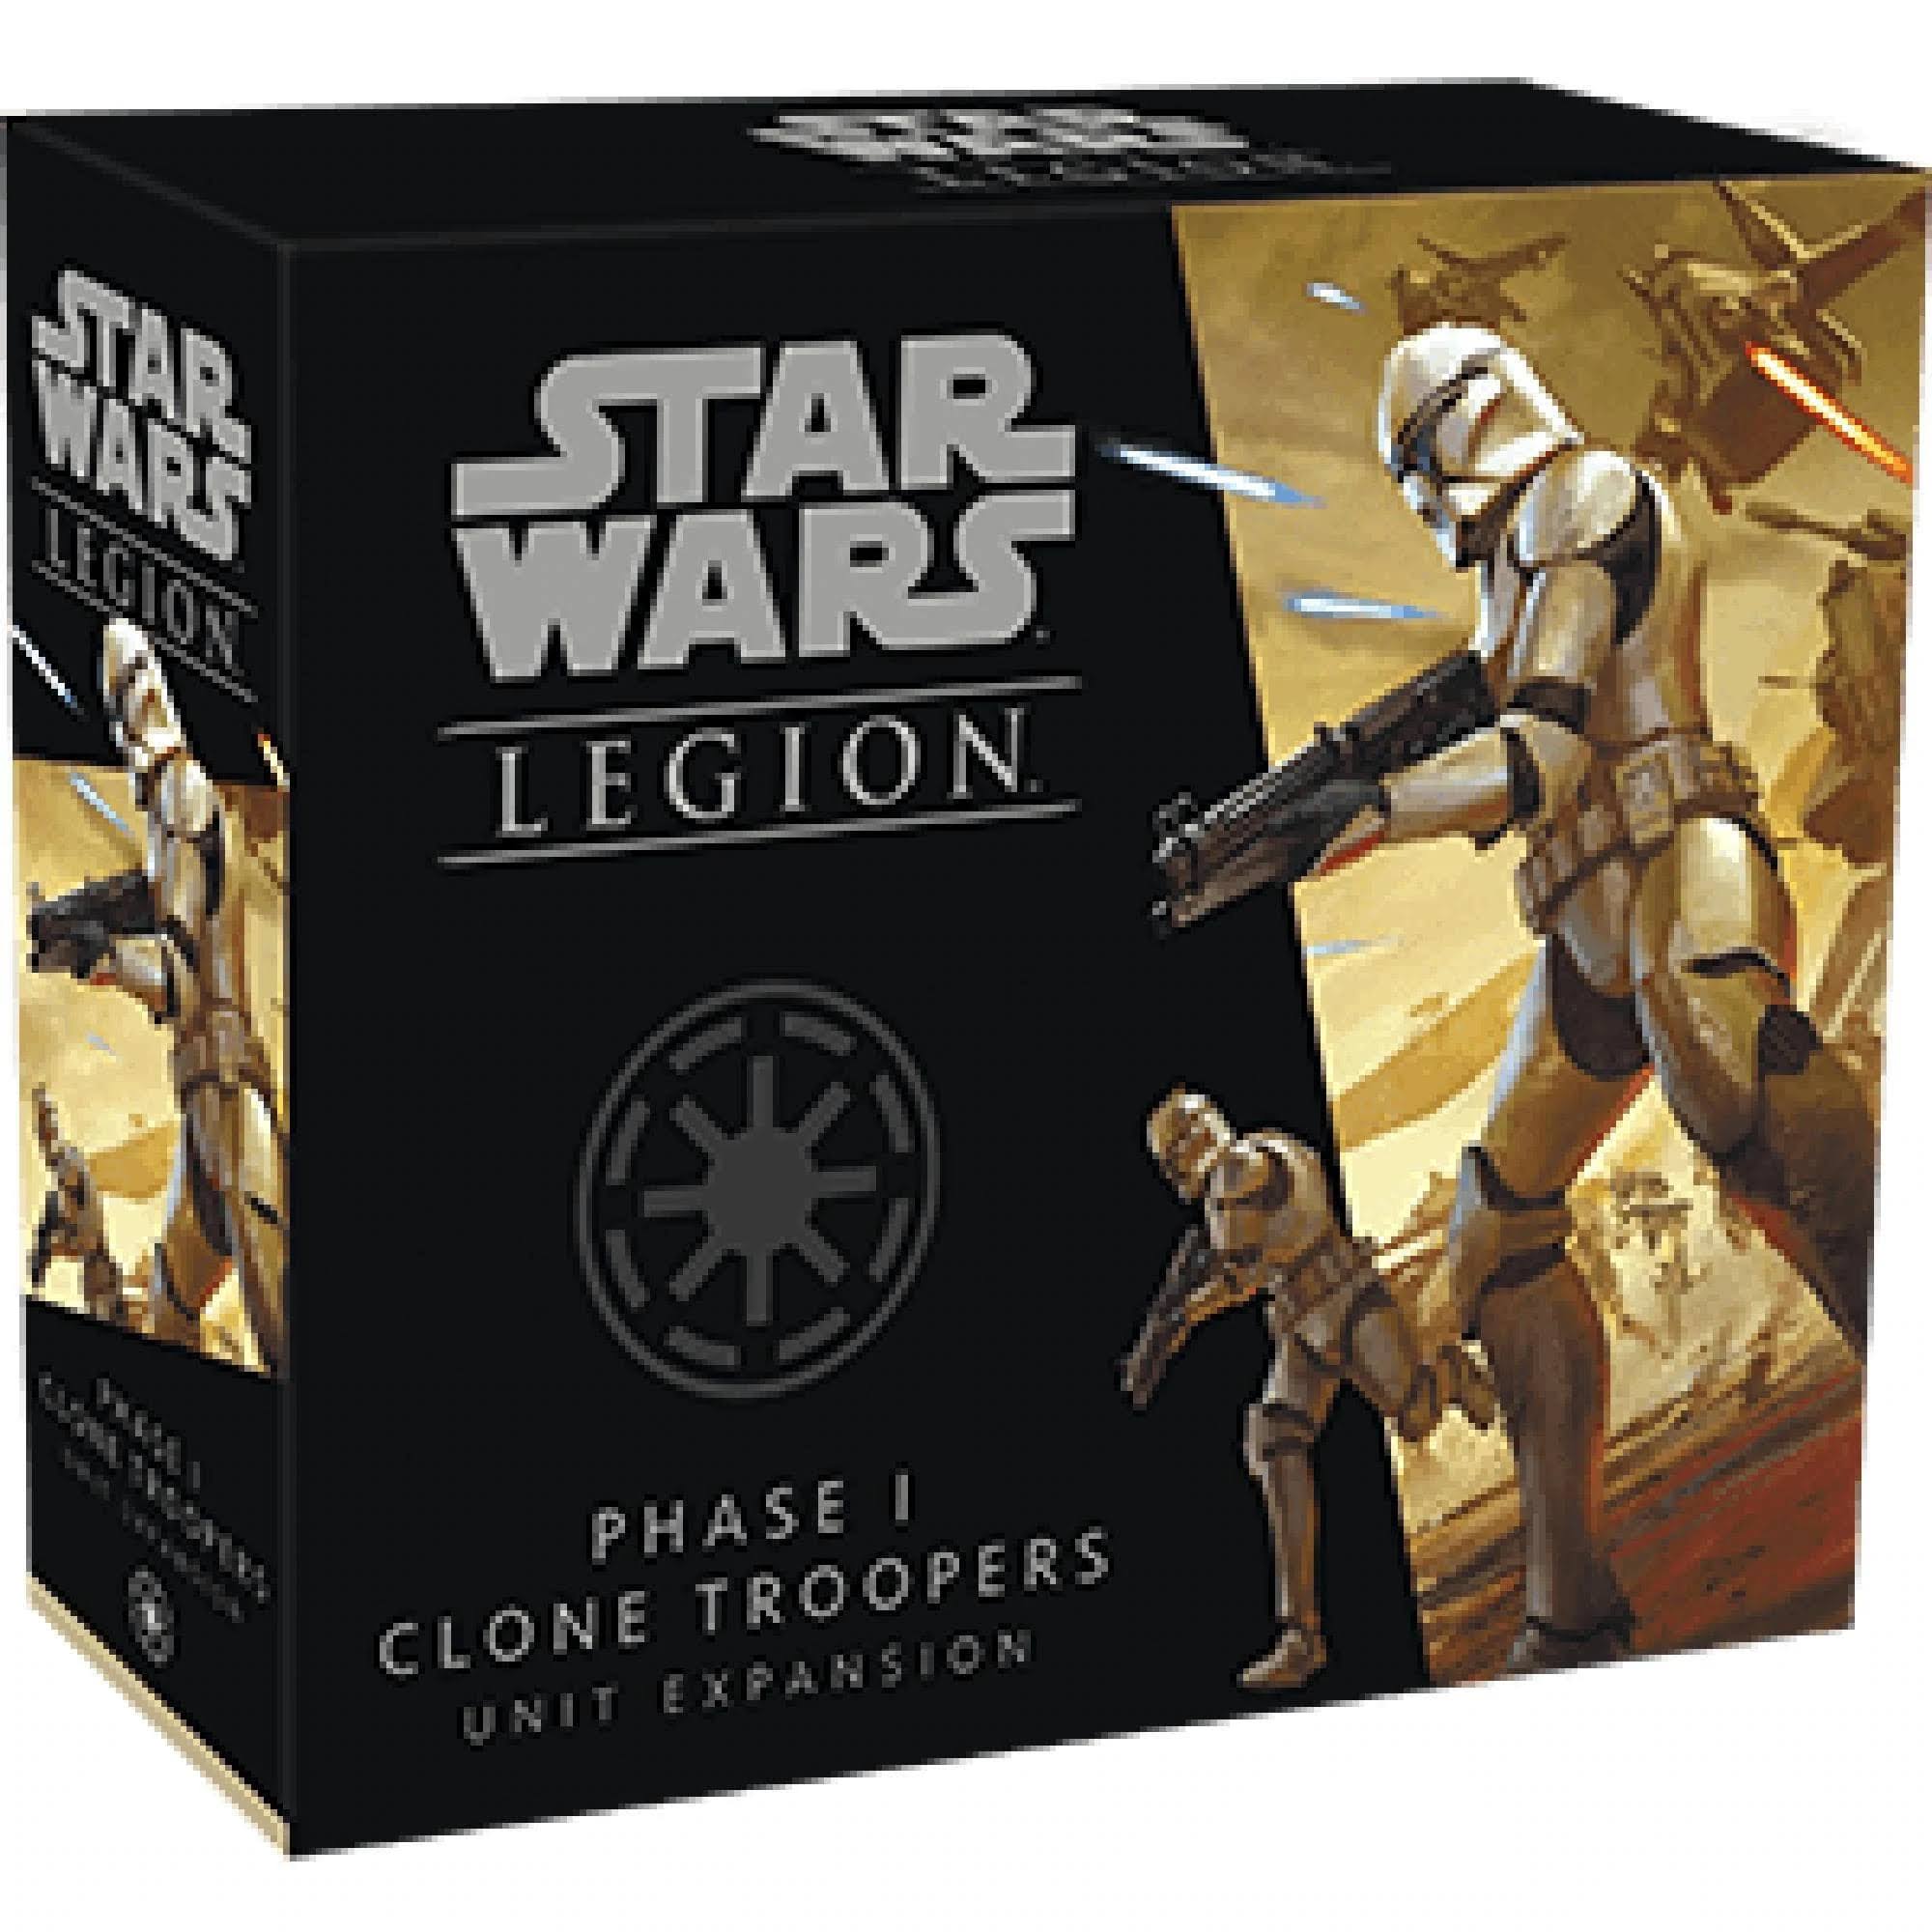 Star Wars Legion: Phase 1 Clone Troopers Unit Expansion